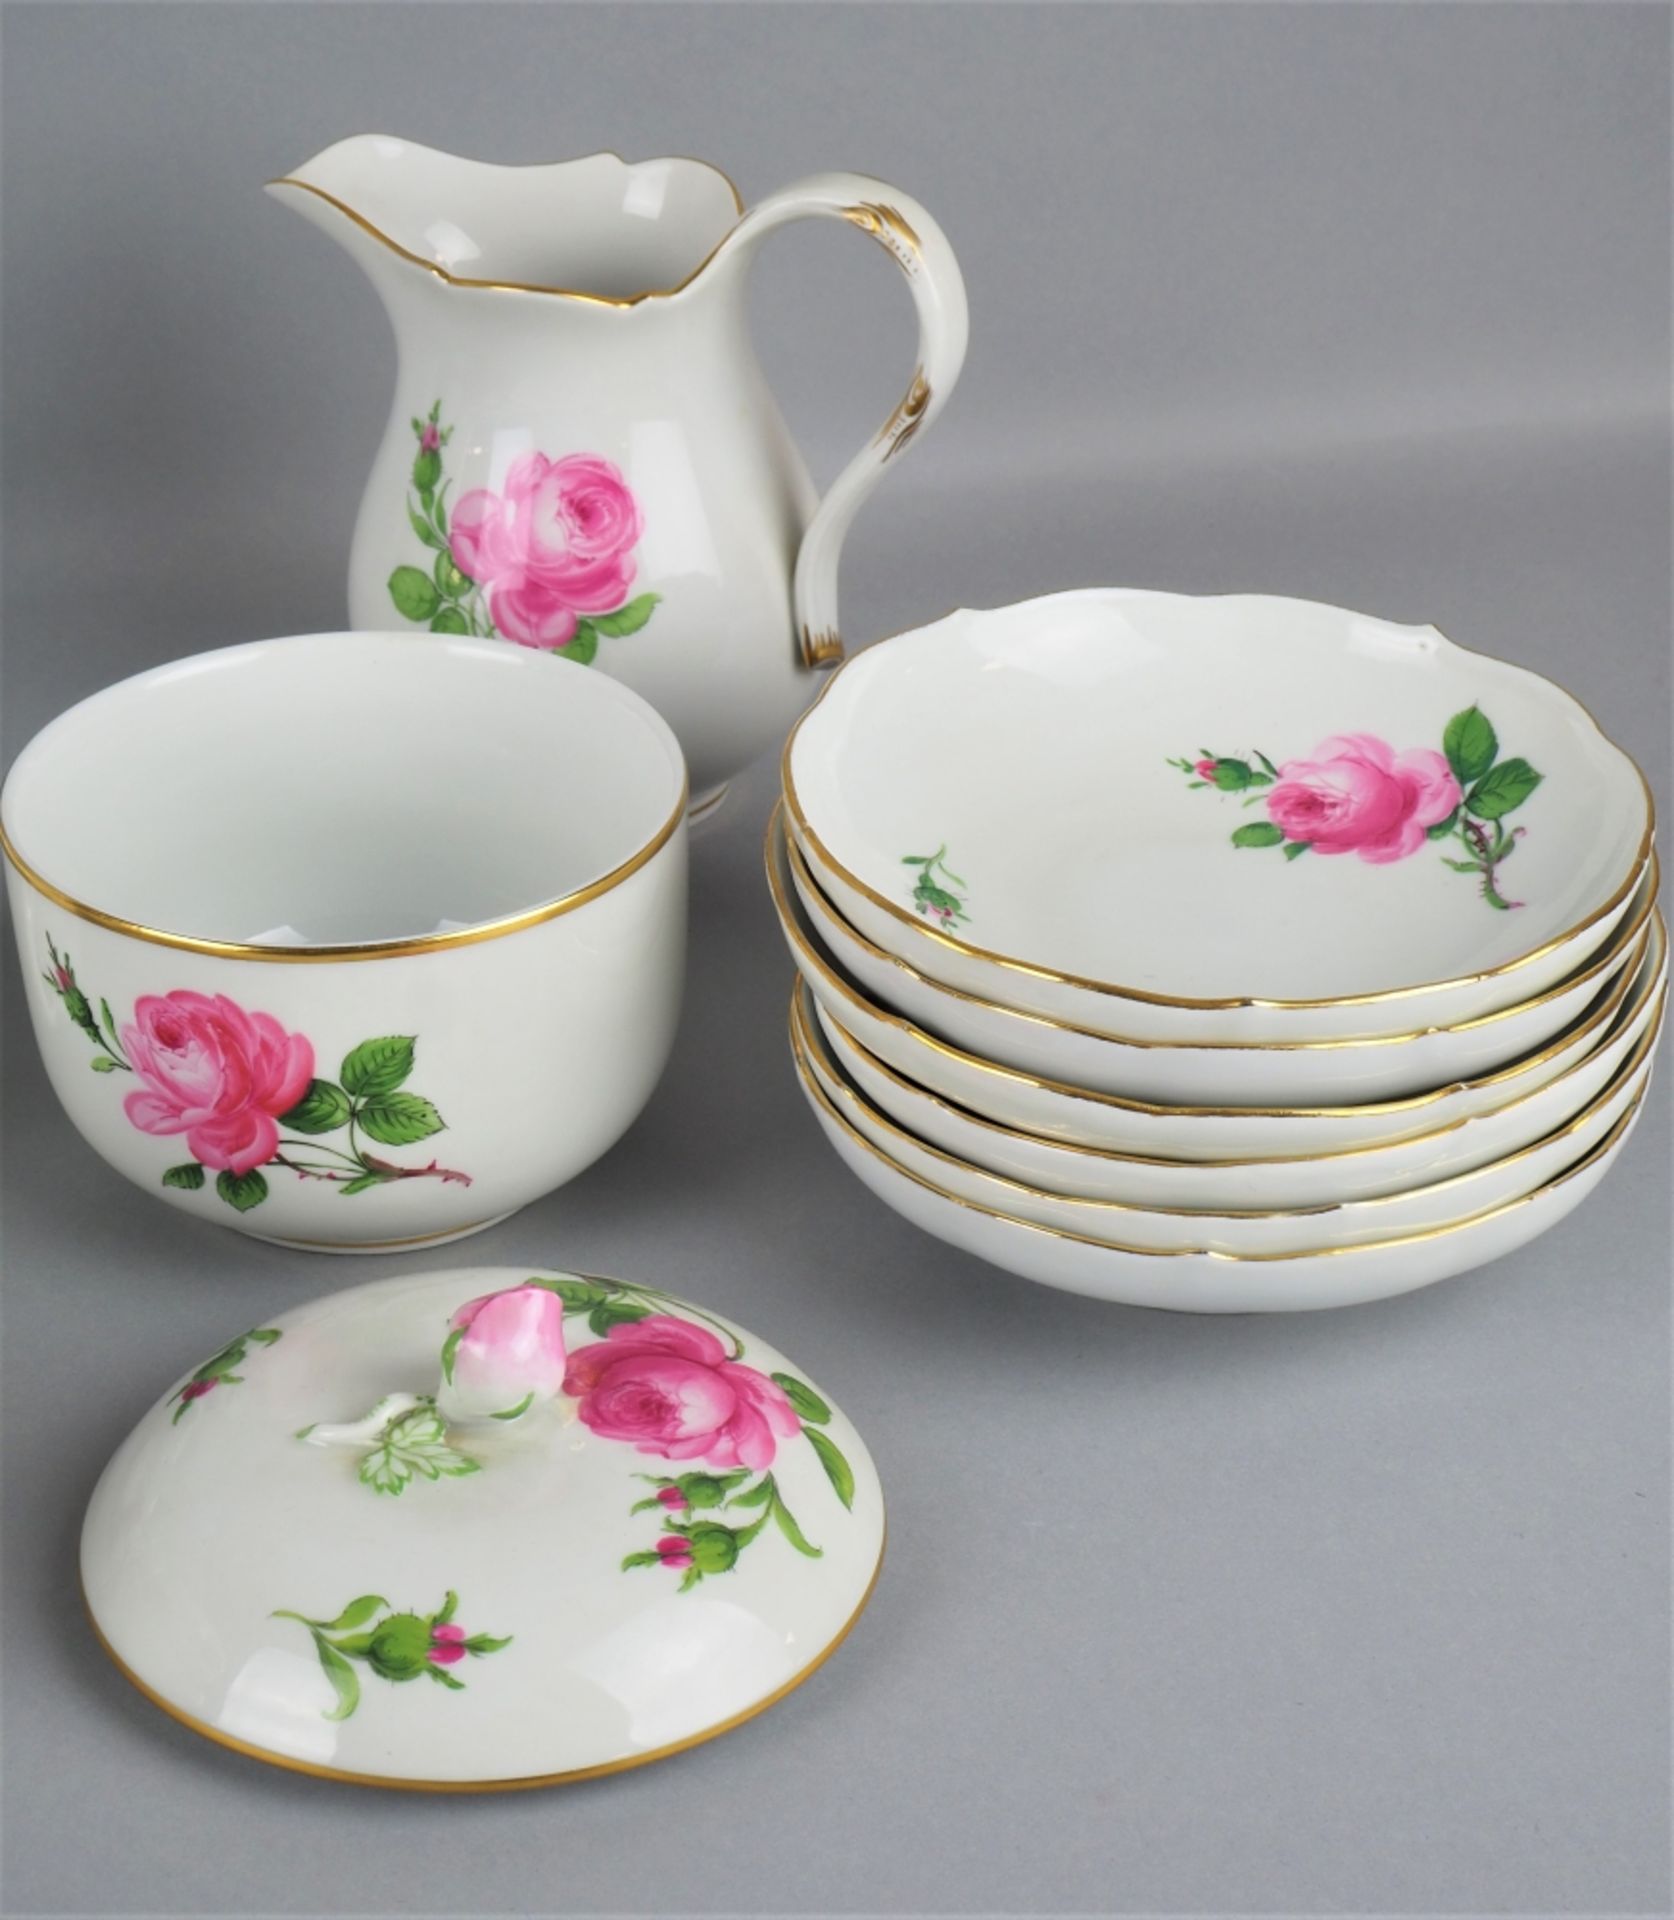 Meissen coffee service, red rose / wild rose, after 1950 - Image 3 of 5